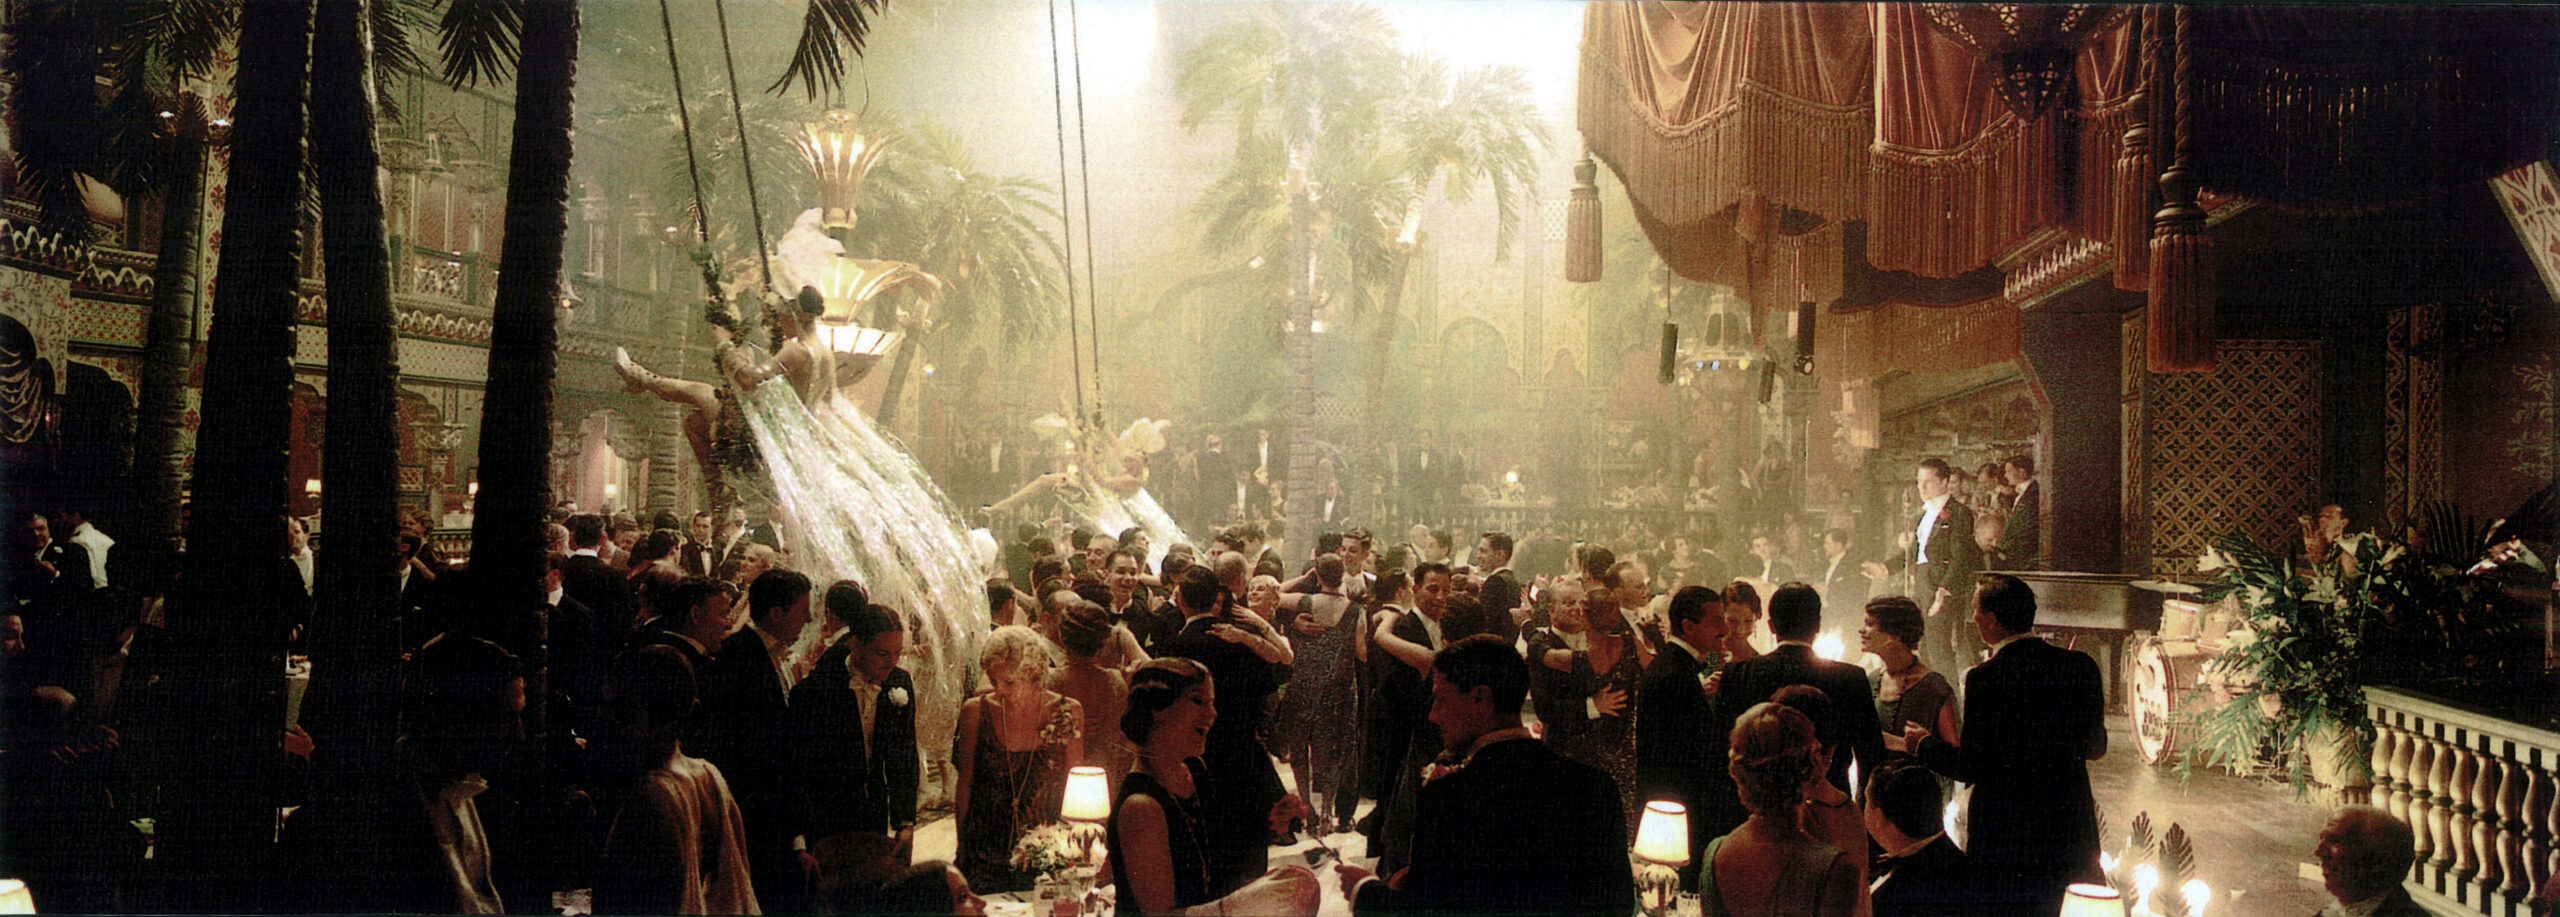 THE AVIATOR - Directed by Martin Scorsese - Int. Cocoanut Grove Club, Stage Set - ©2004 - Miramax Films